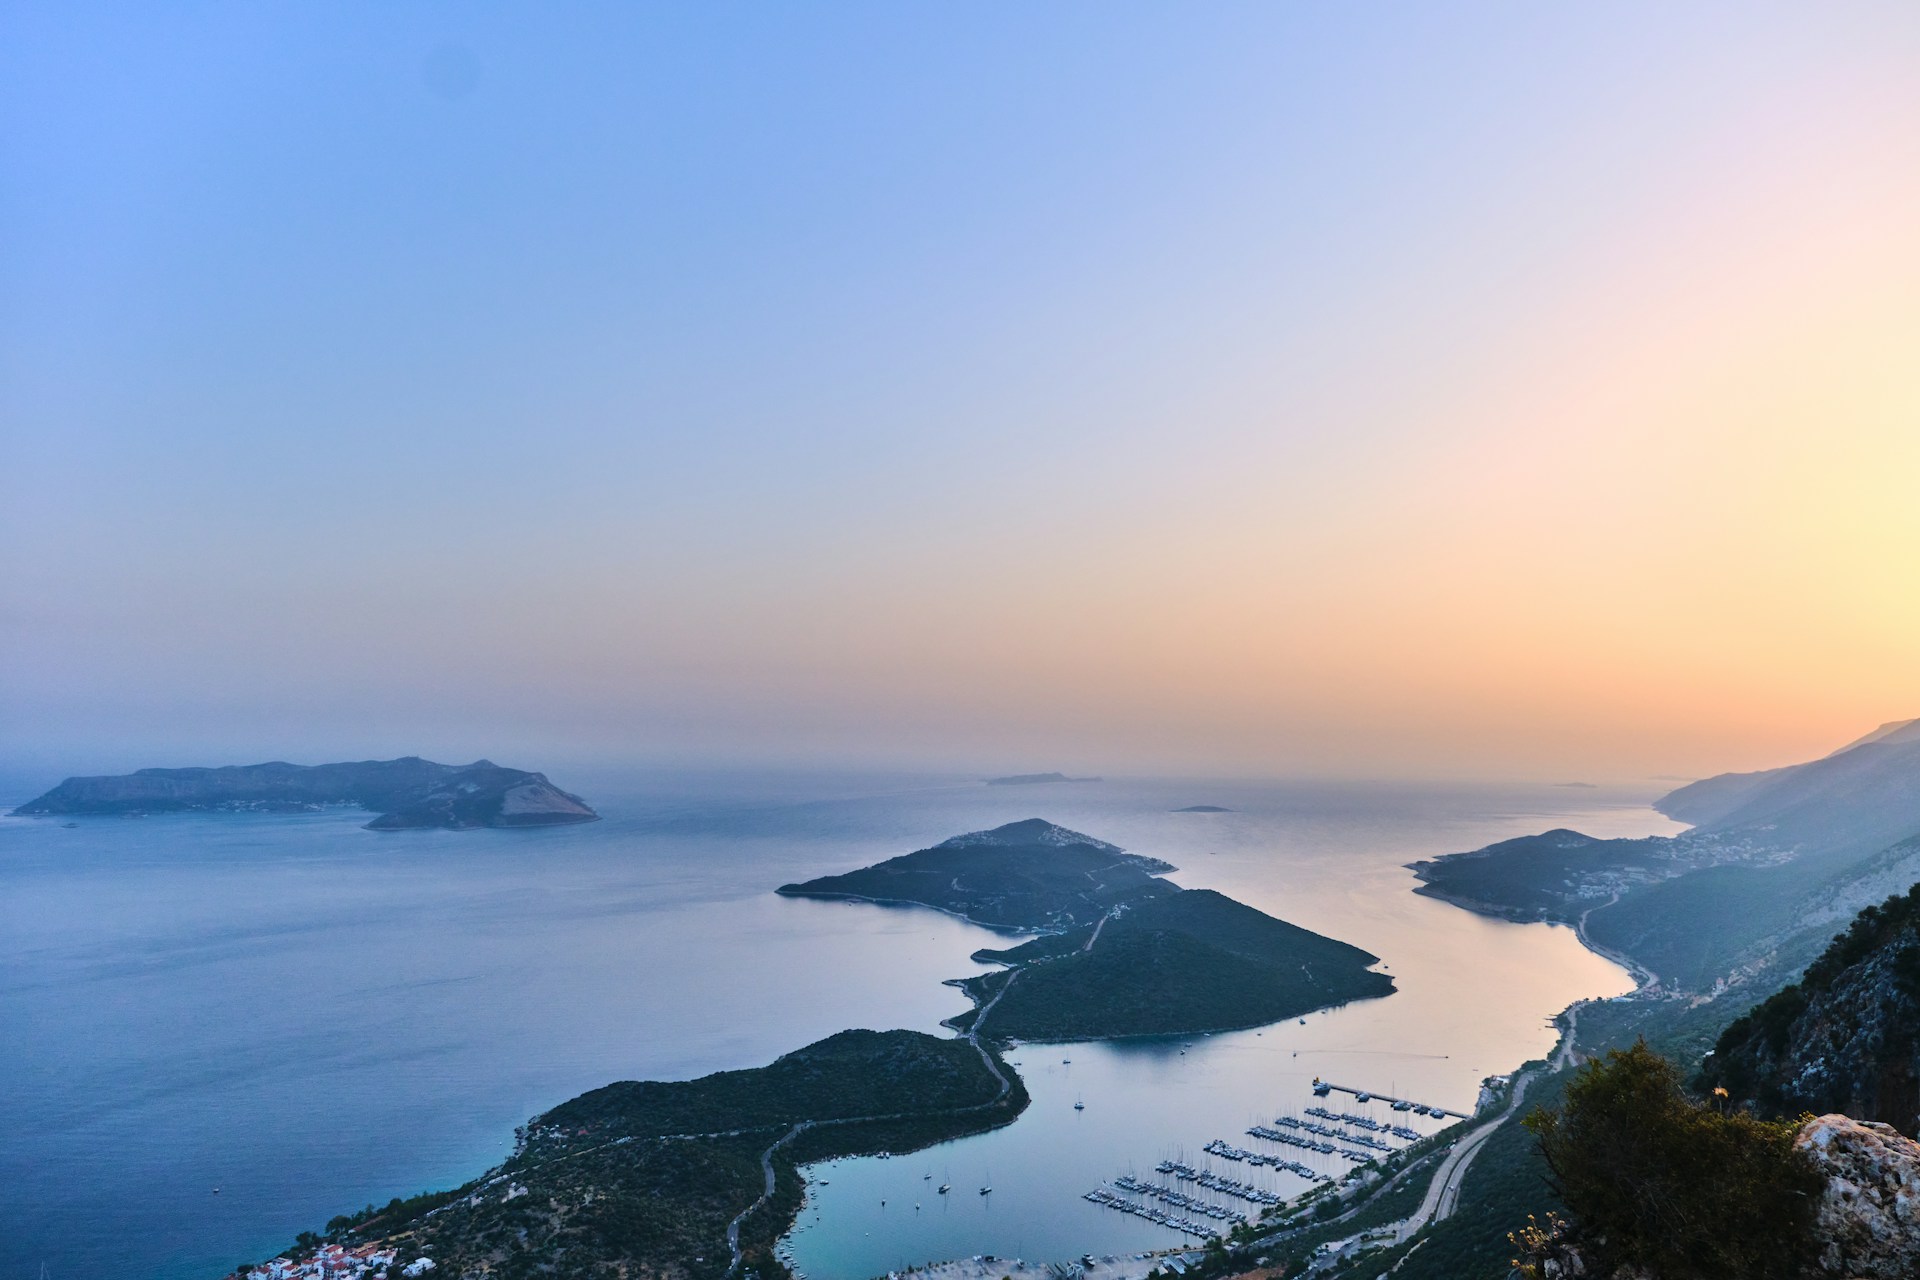 <p>Kaş is an old fishing village far enough away from the big coastal towns to become a cult, hippie destination. Surrounded by mountains with a sea of clear turquoise waters, Kaş is a real sight for sore eyes.</p> <p>Photo: Oguzhan Tasimaz / Unsplash</p>   <p><a href="https://www.msn.com/en-us/channel/source/Showbizz%20Daily%20English/sr-vid-w8hcuhvu3f8qr5wn5rk8xhsu5x8irqrgtxcypg4uxvn7tq9vkkfa?cvid=cddbc5c4fc9748a196a59c4cb5f3d12a&ei=7" rel="noopener">Follow Showbizz Daily to see the best photo galleries every day</a></p>